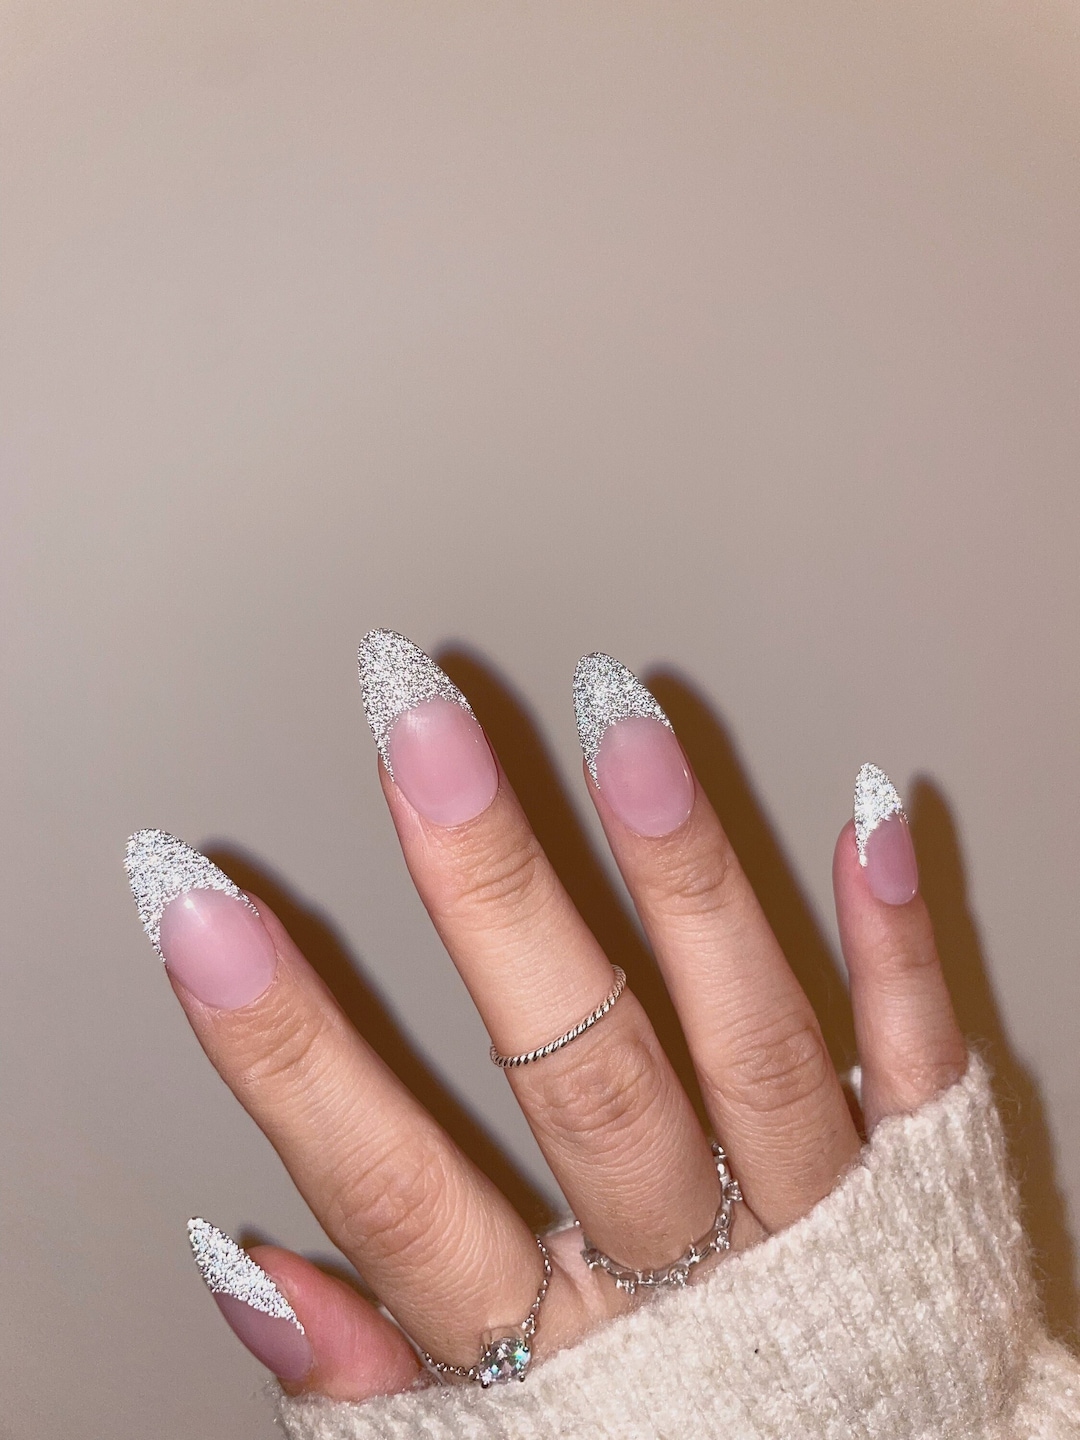 55 Cute Short Nails Ideas and Designs You Must See | White glitter nails,  Glitter gel nails, Gel nails